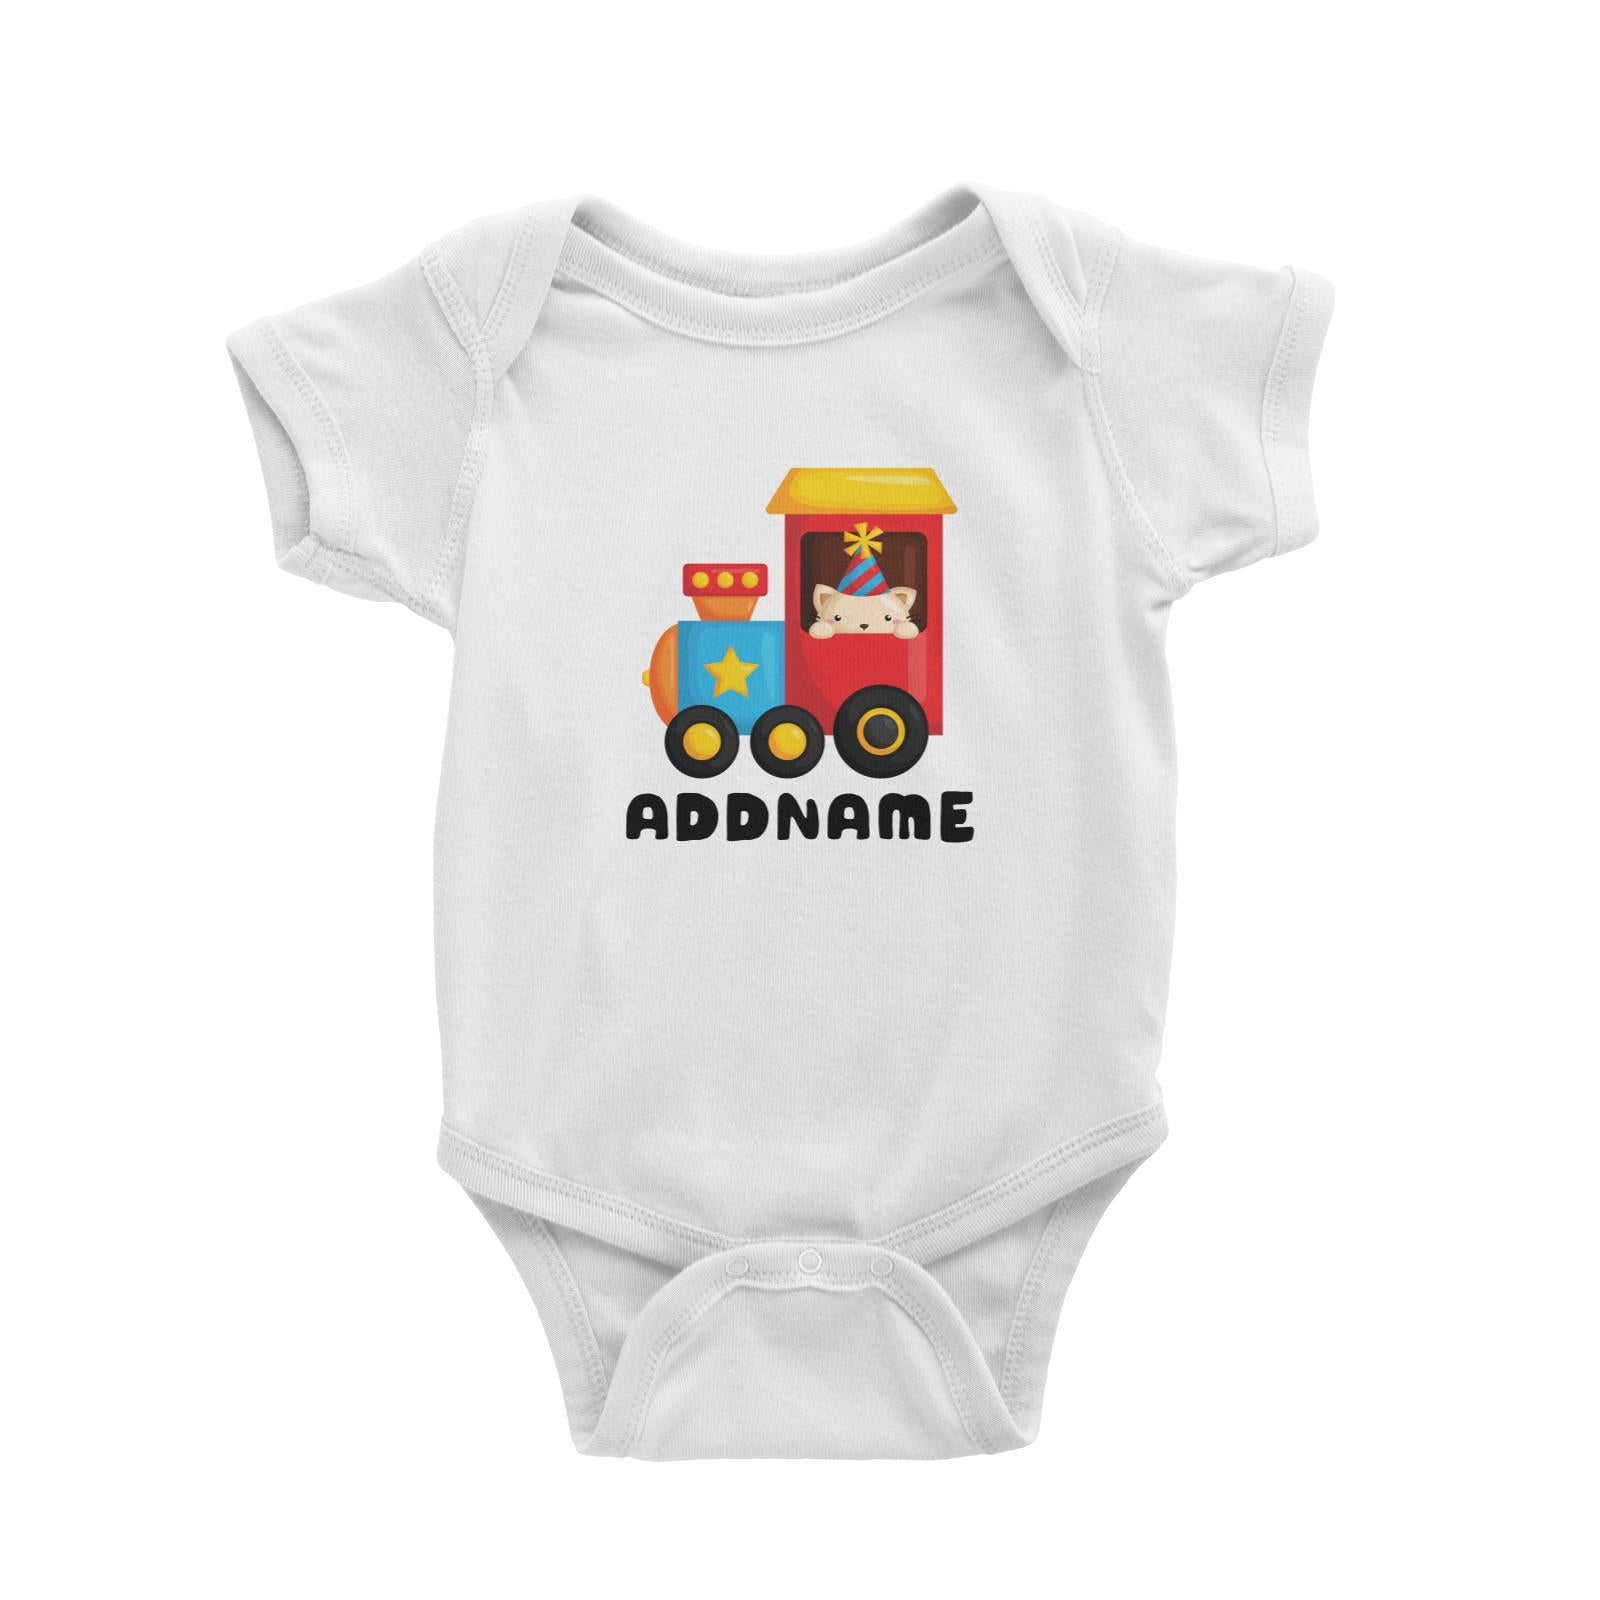 Birthday Fun Train Cat Wearing Party Hat Addname Baby Romper